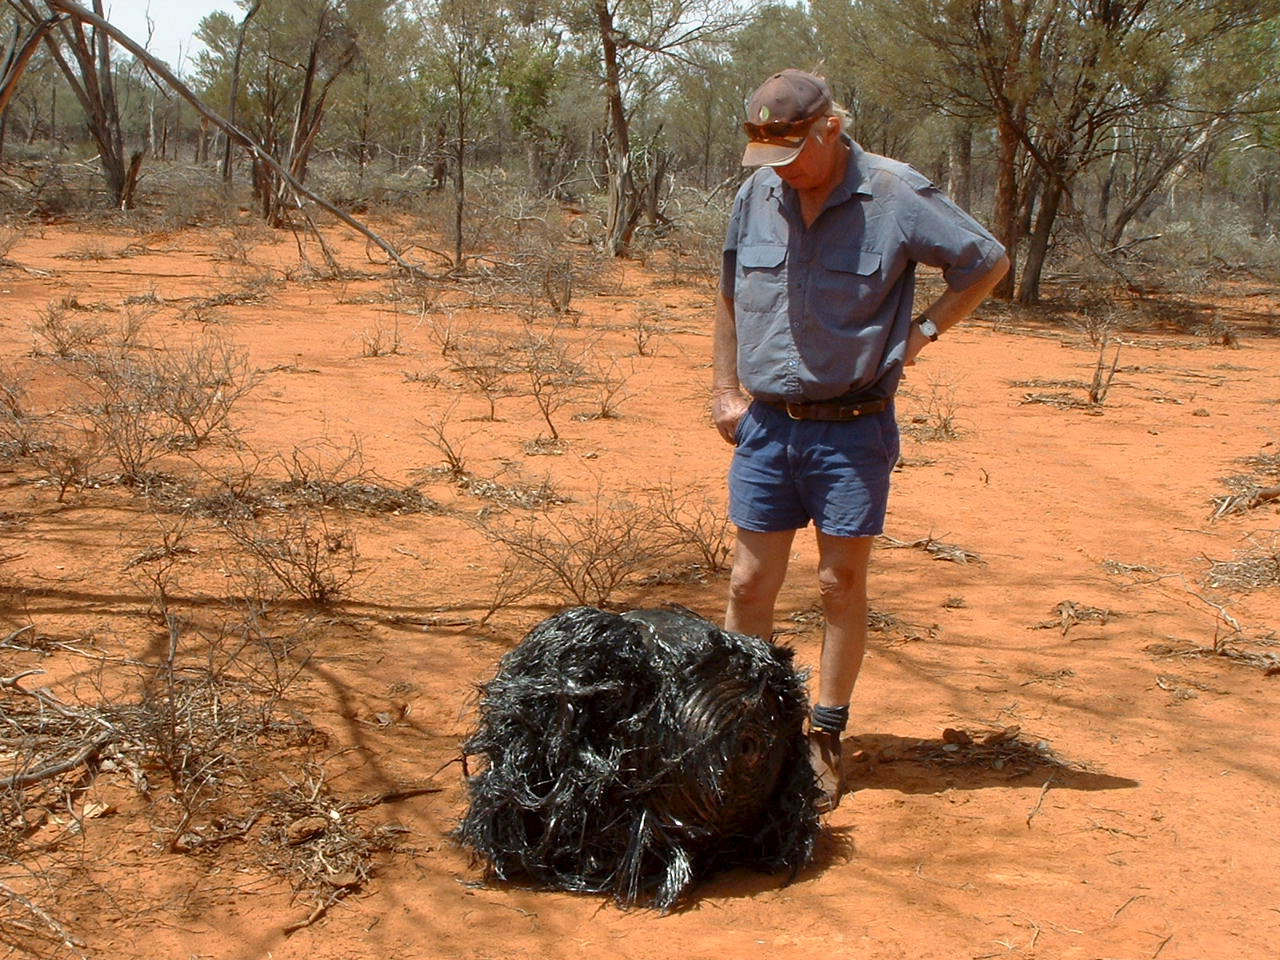 Farmer James Striton next to a metal object he discovered on his farm in Cheepie, 130km from Charleville in southwestern Queensland in November 2007. The ball of twisted metal is believed to be space junk, possibly from a rocket used to launch satellites into space.